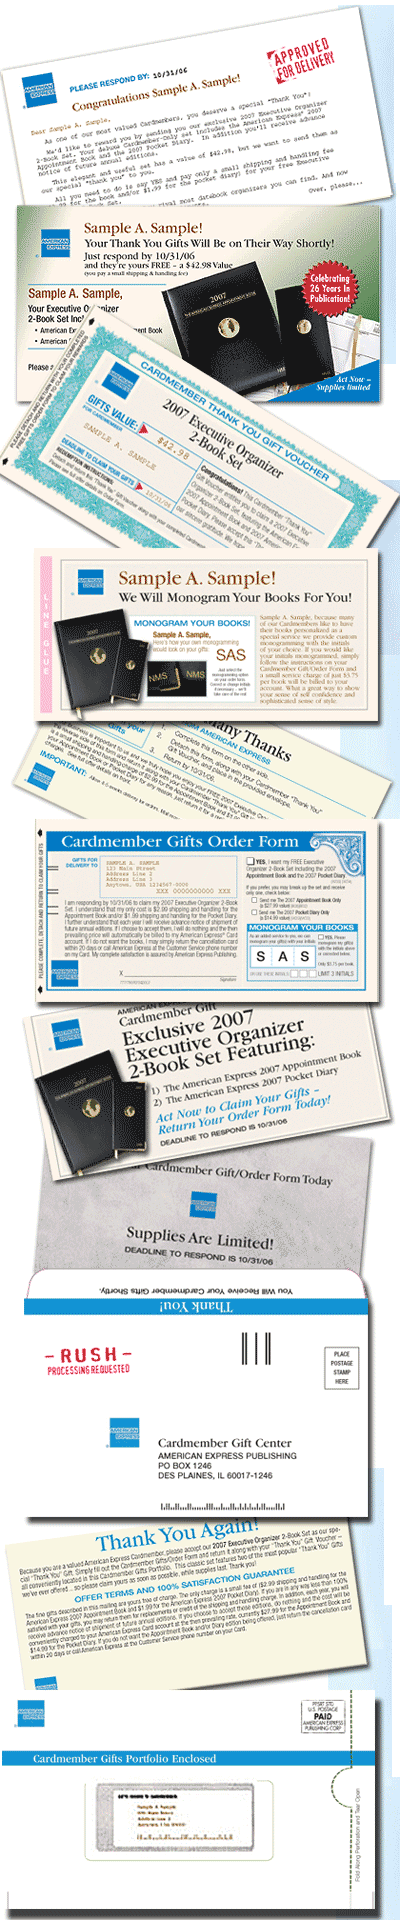 American Express Publishing
Appointment Book & Diary Offer
